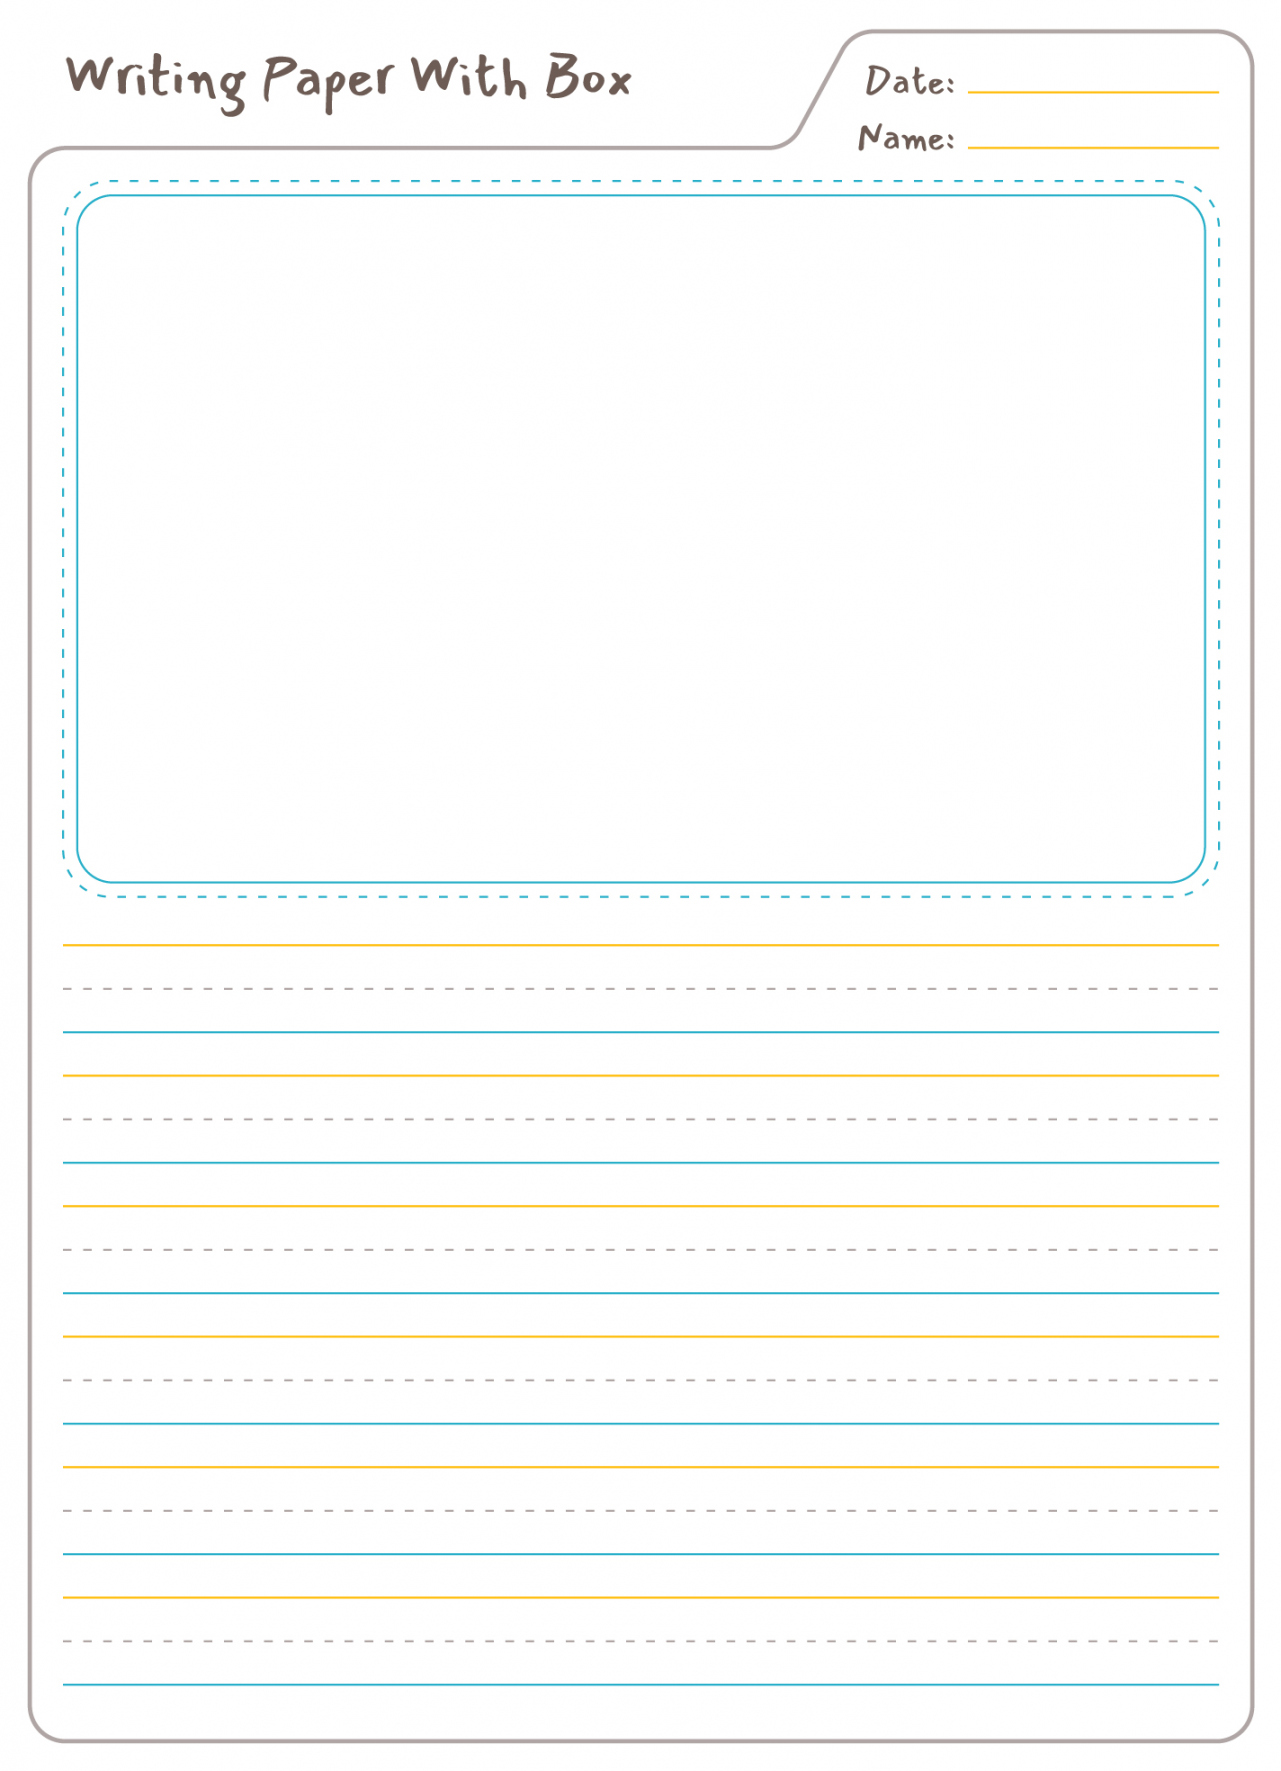 Lined Paper With Picture Box Free Google Docs Template - gdoc - Lined Paper With Picture Box